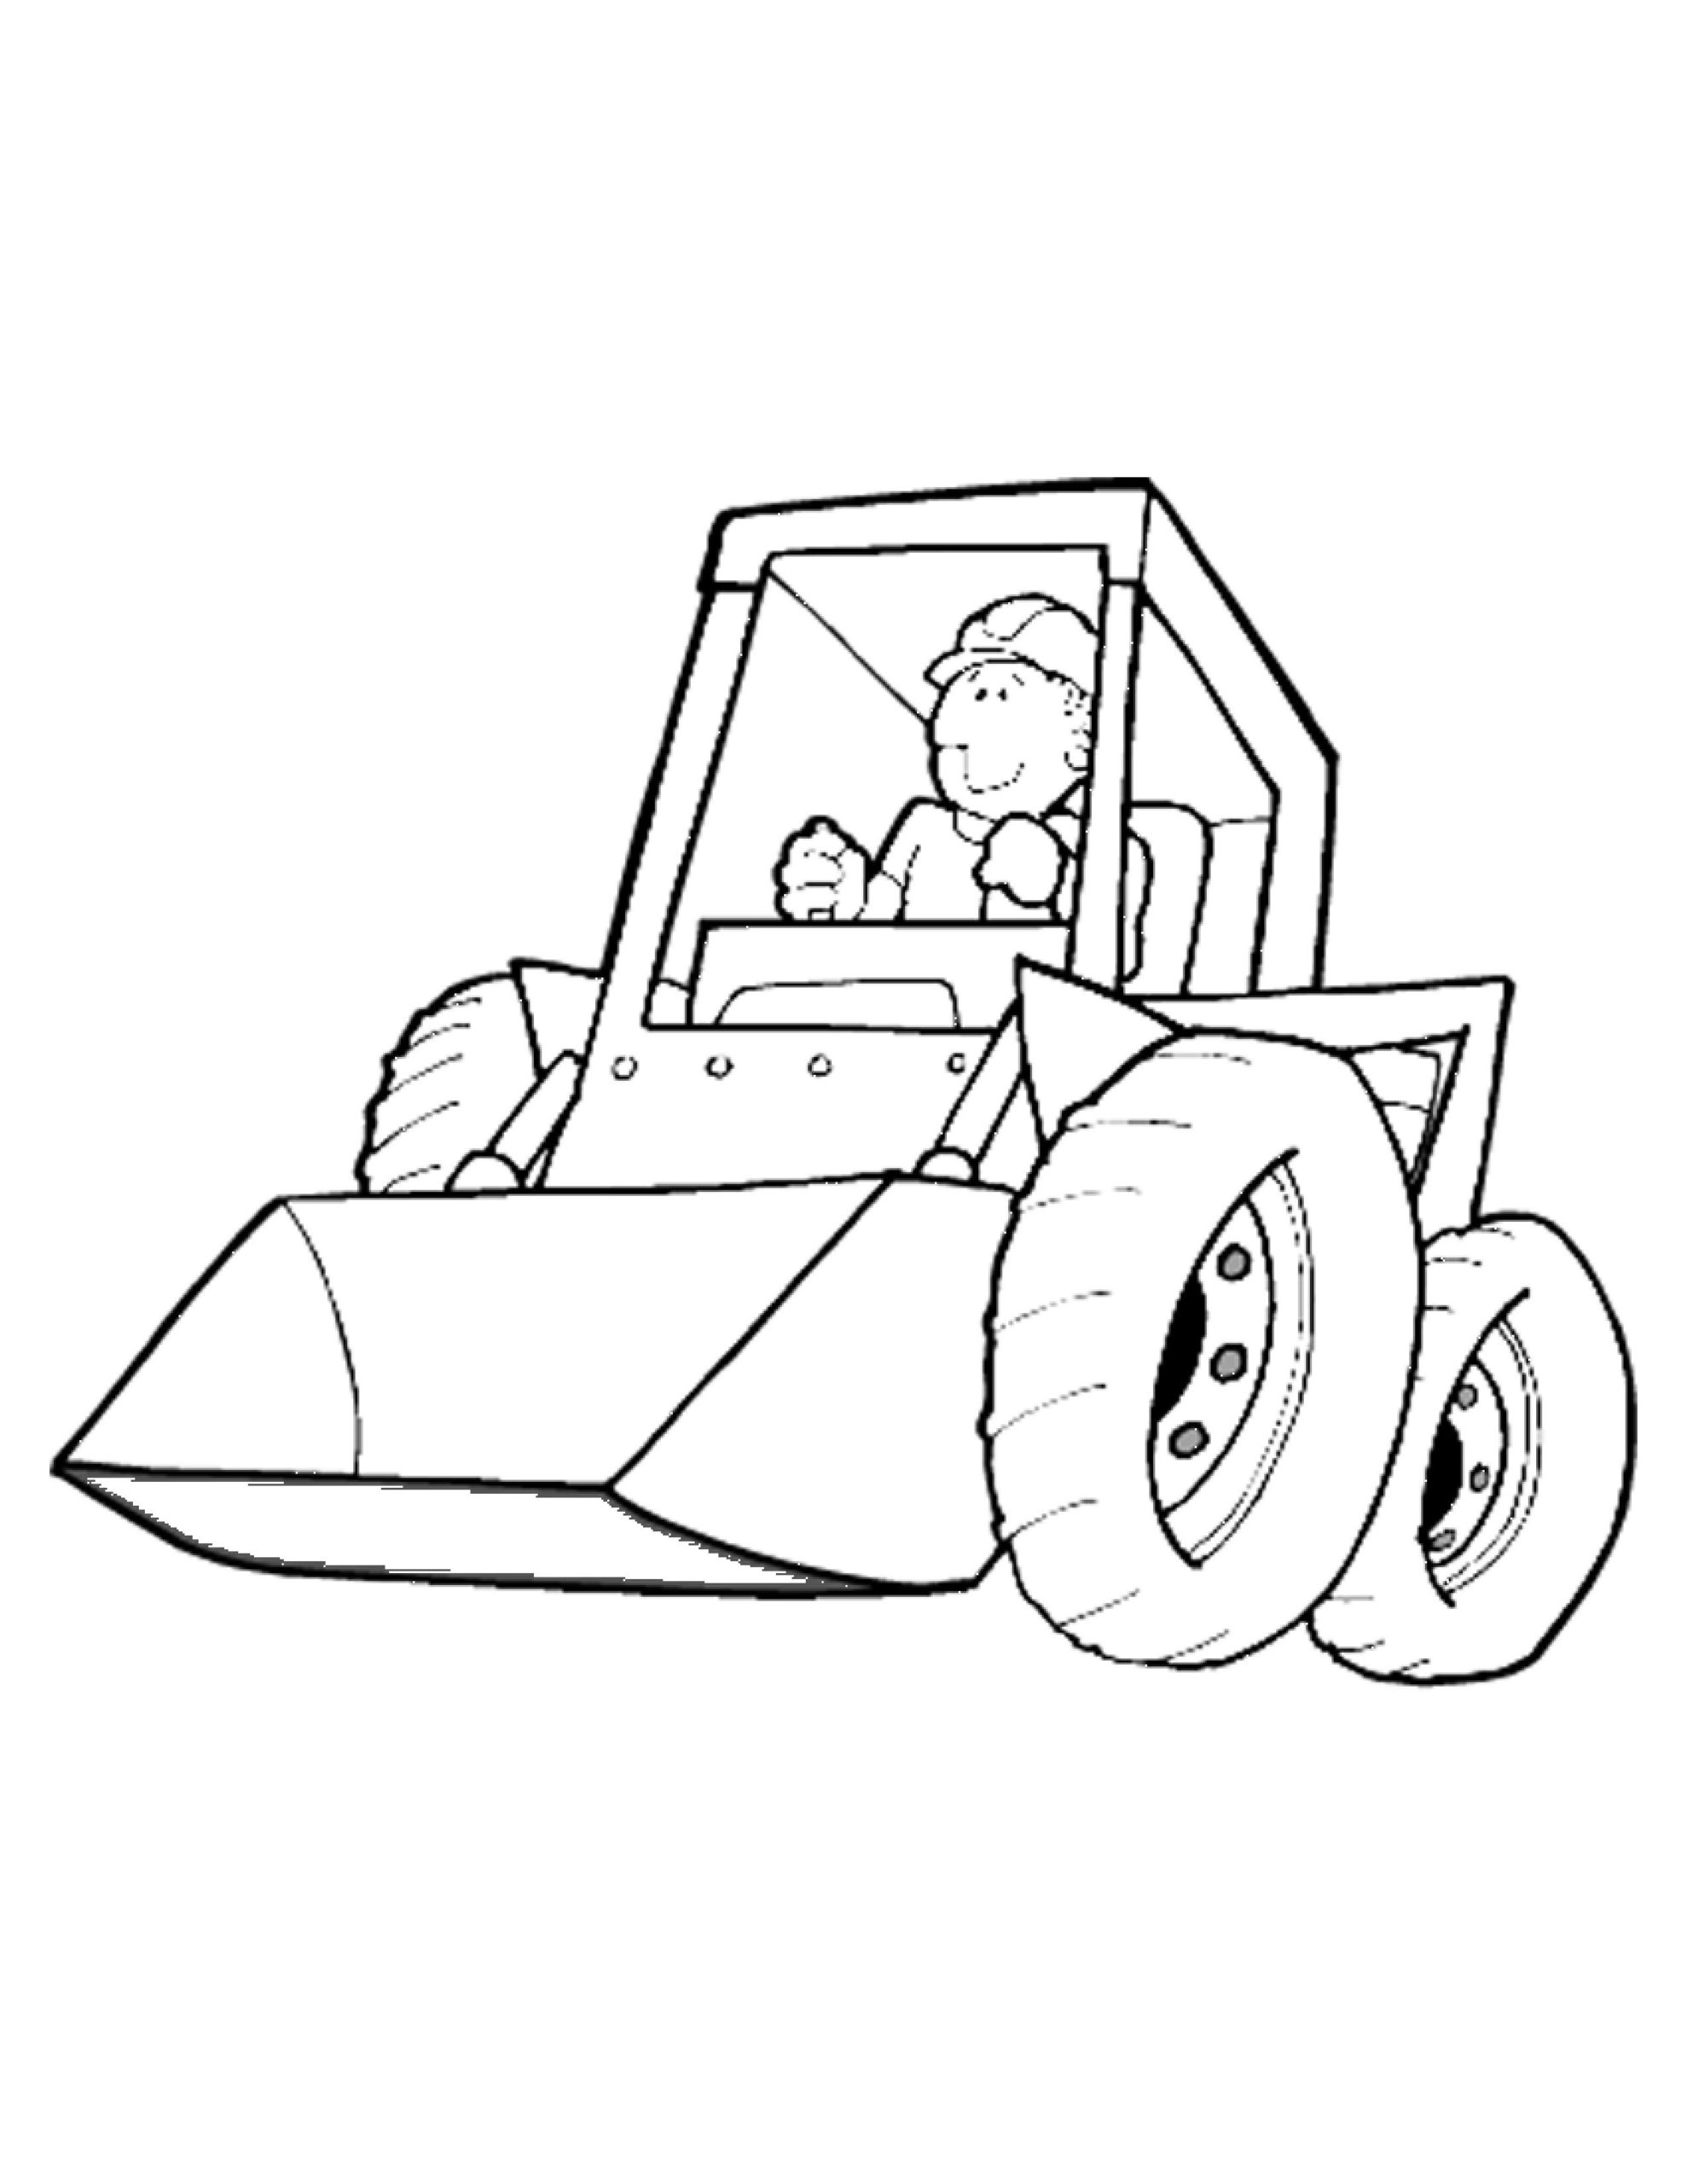 Coloring Pages : Free Construction Coloring Pages Aterxybyc ...